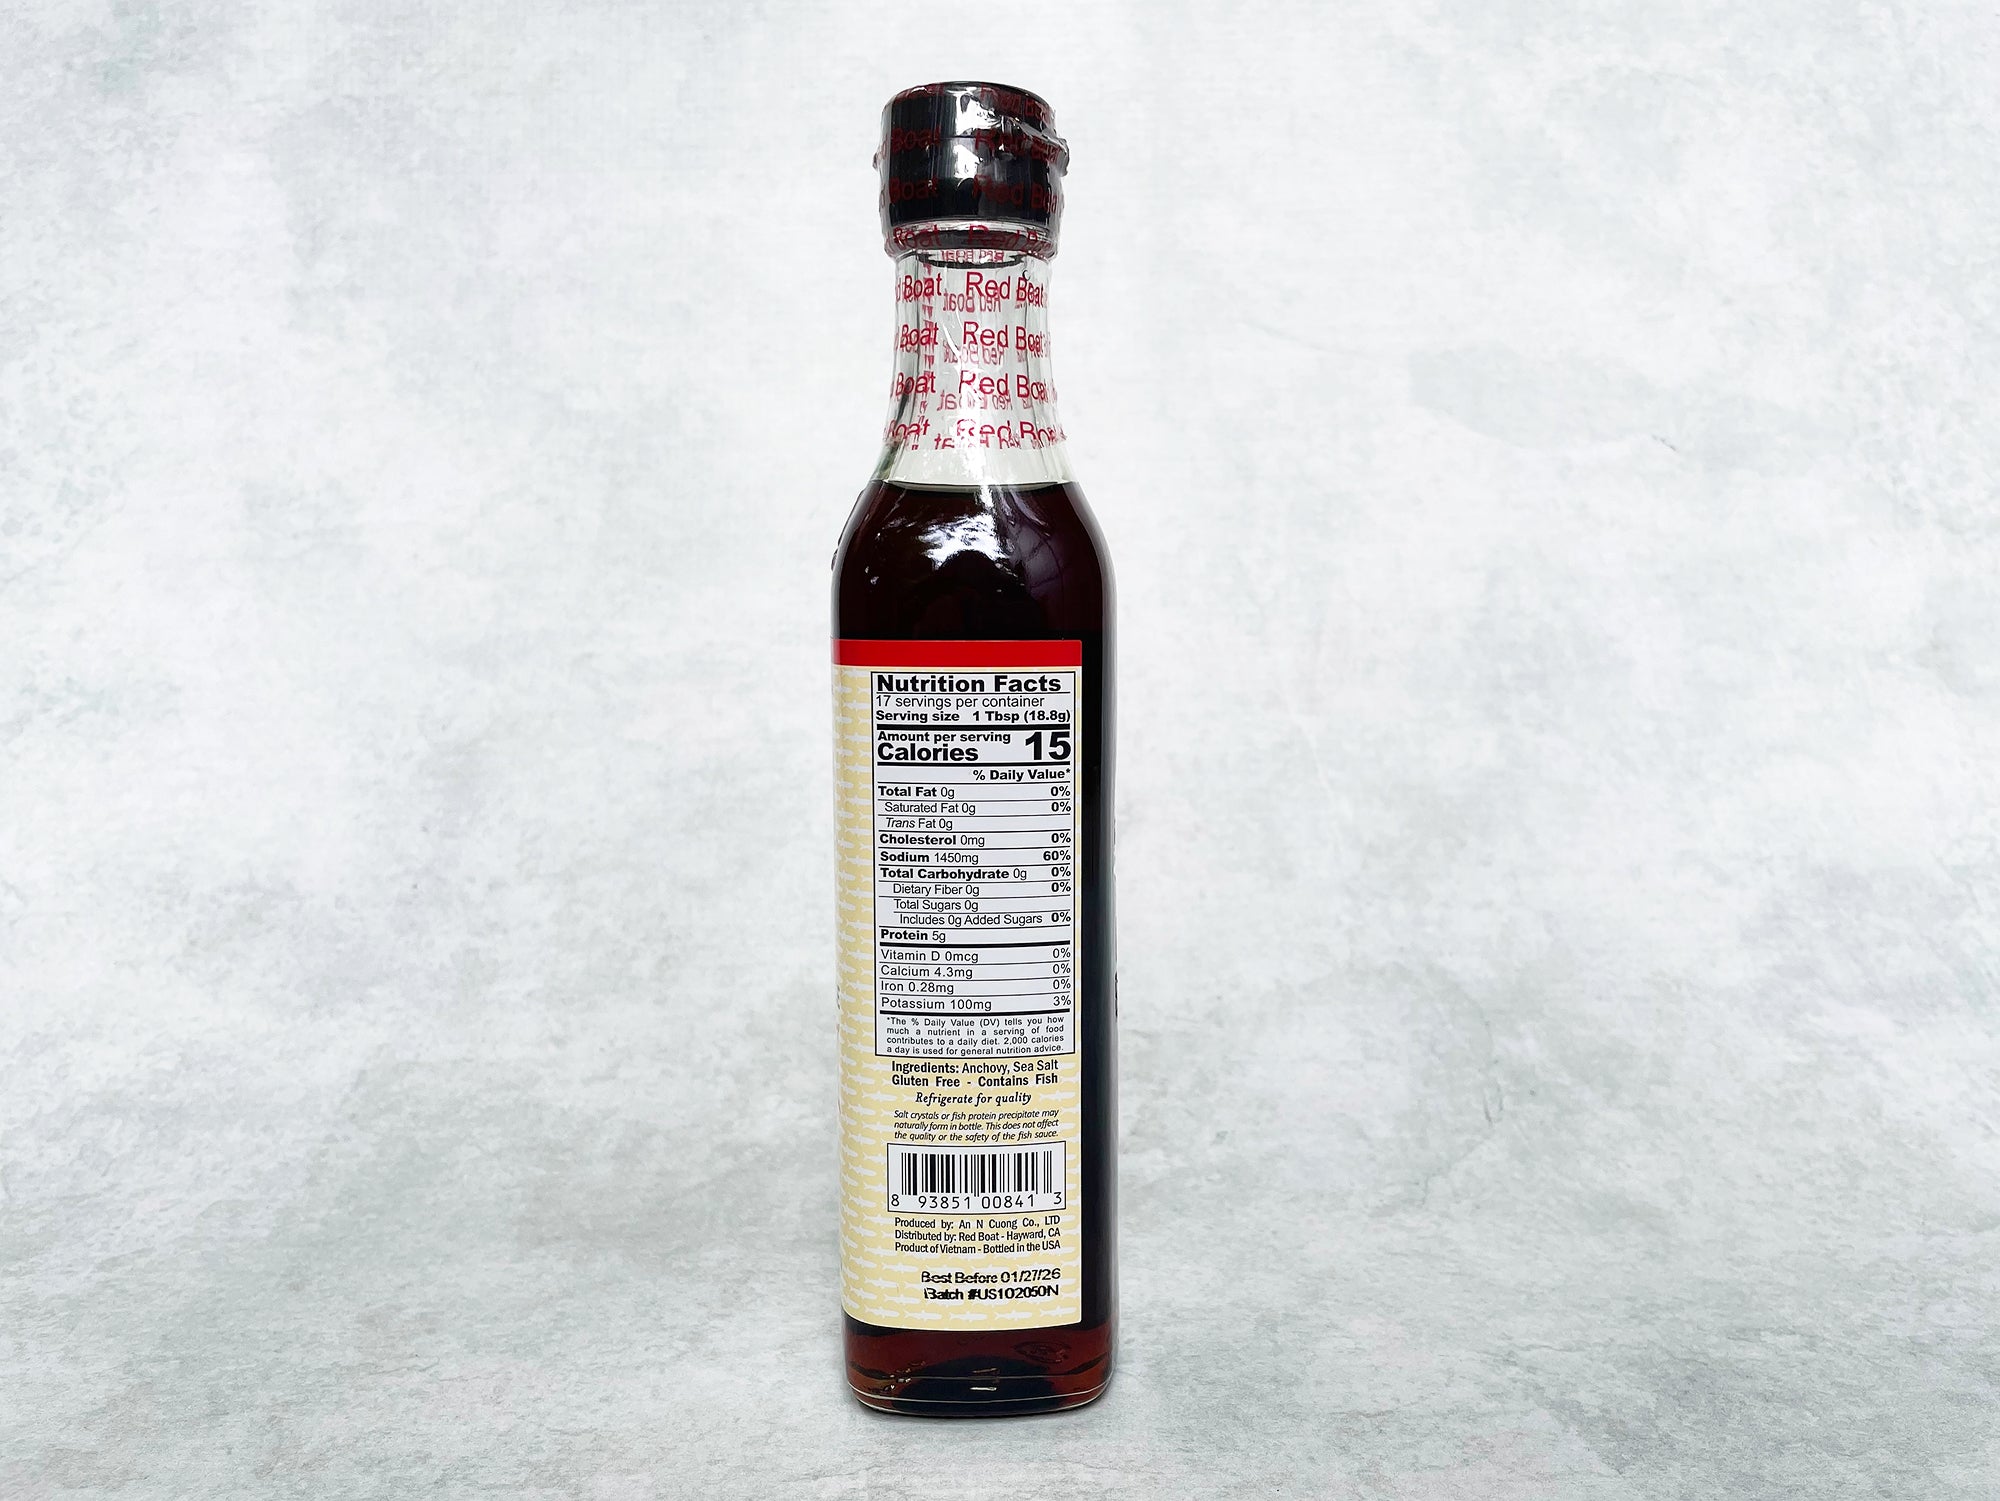 Red Boat Fish Sauce side label